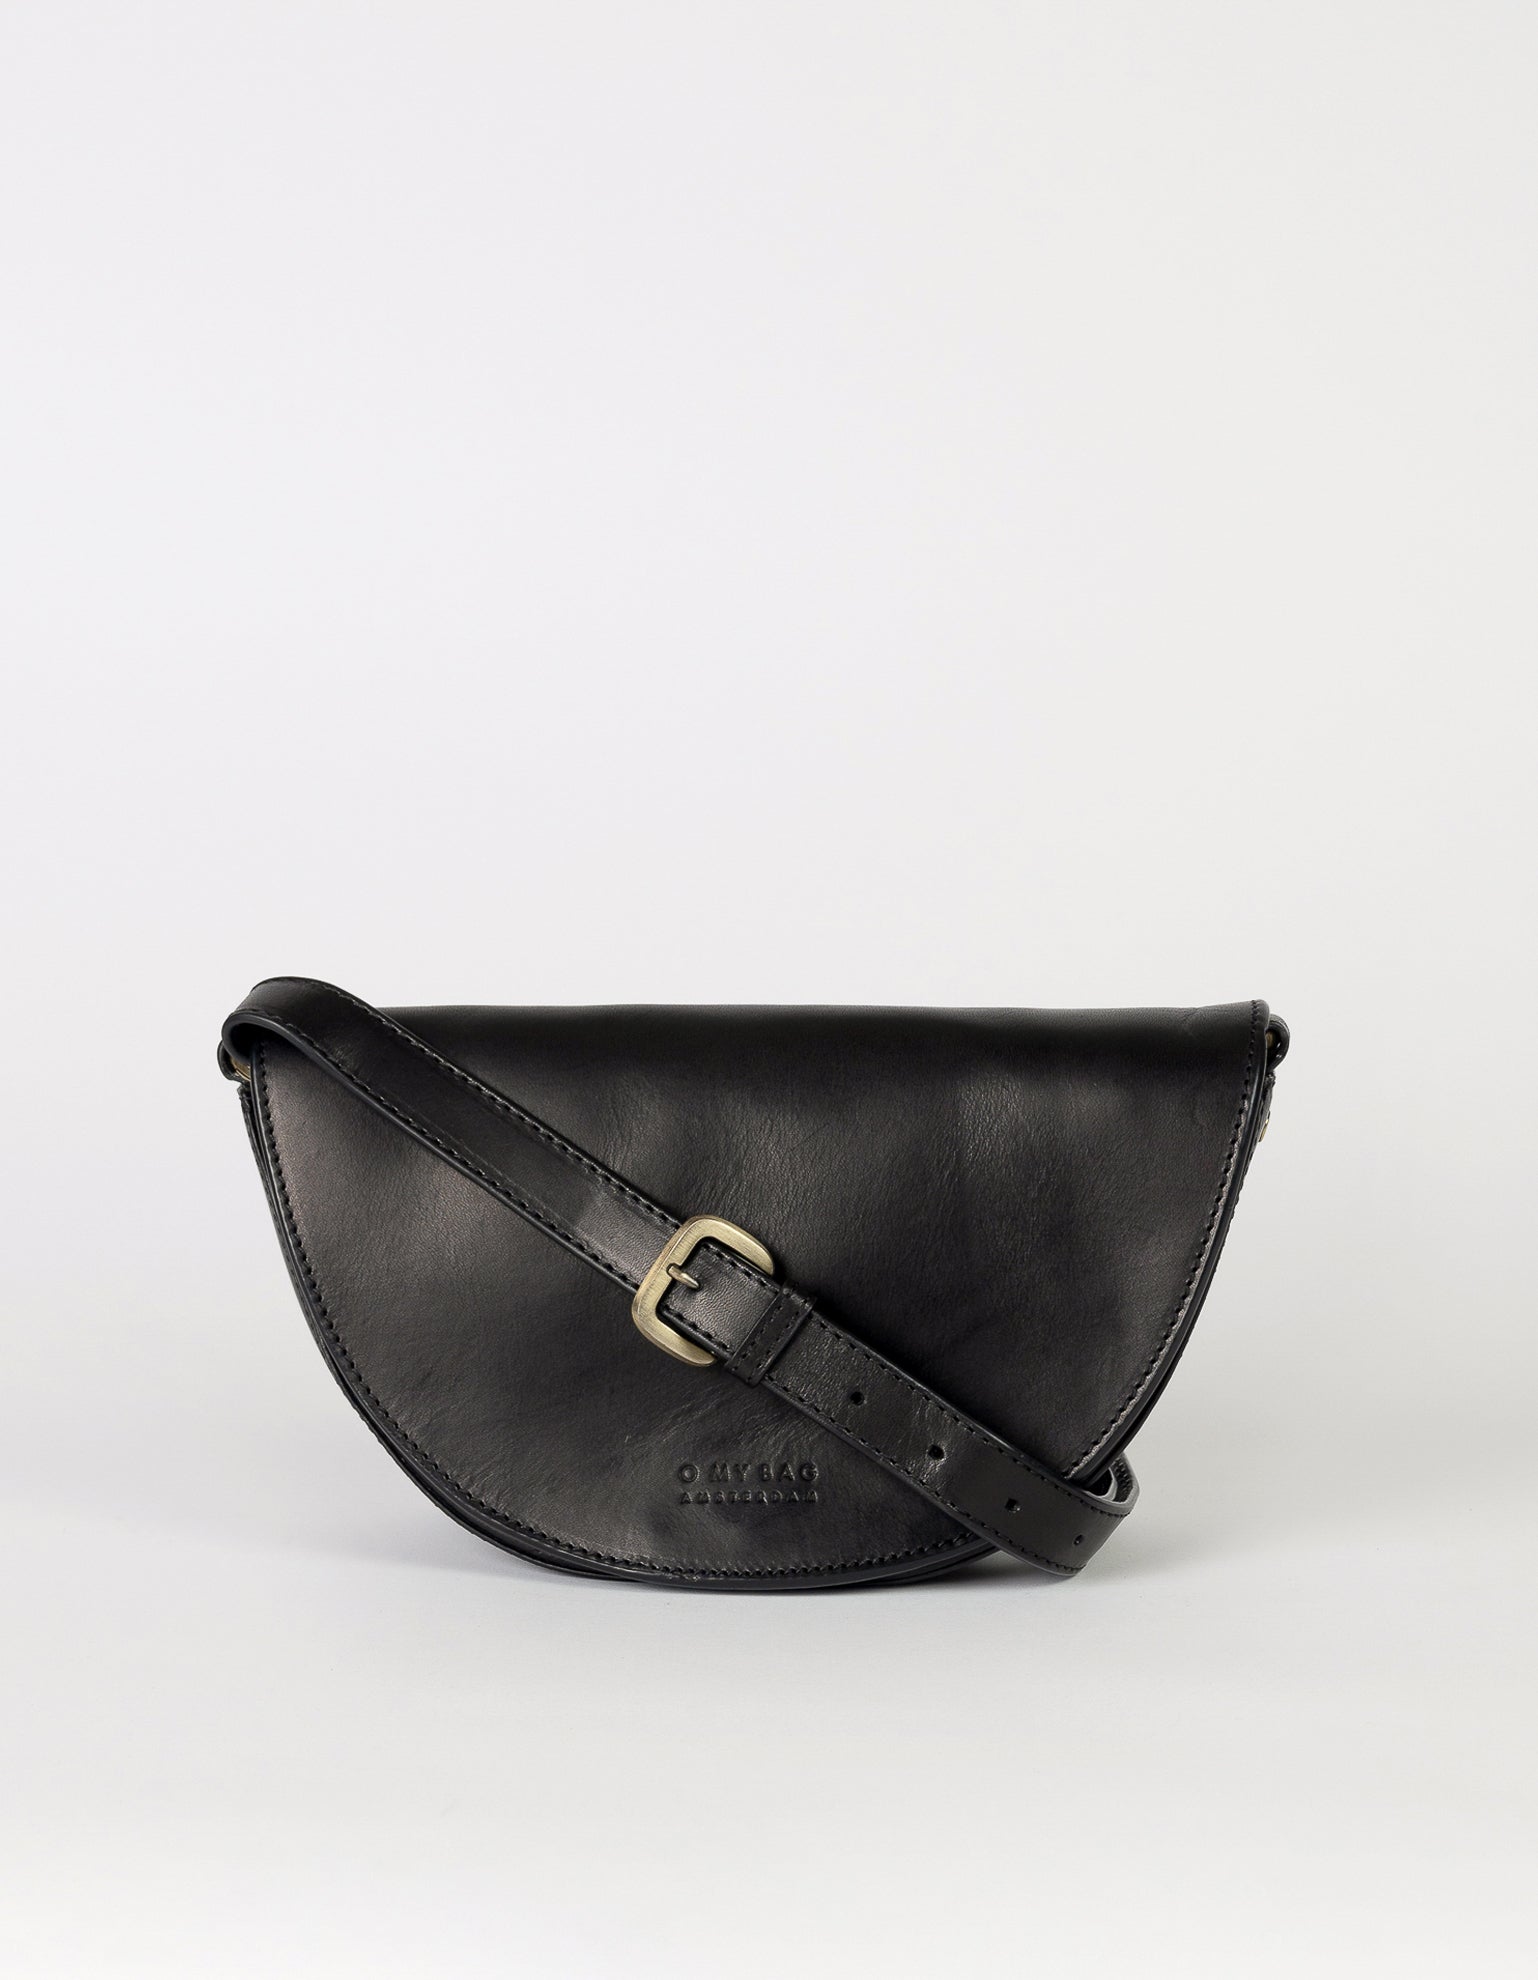 Laura Bag Black Classic Leather. Round moon shape crossbody bag with full leather strap. Front product image.